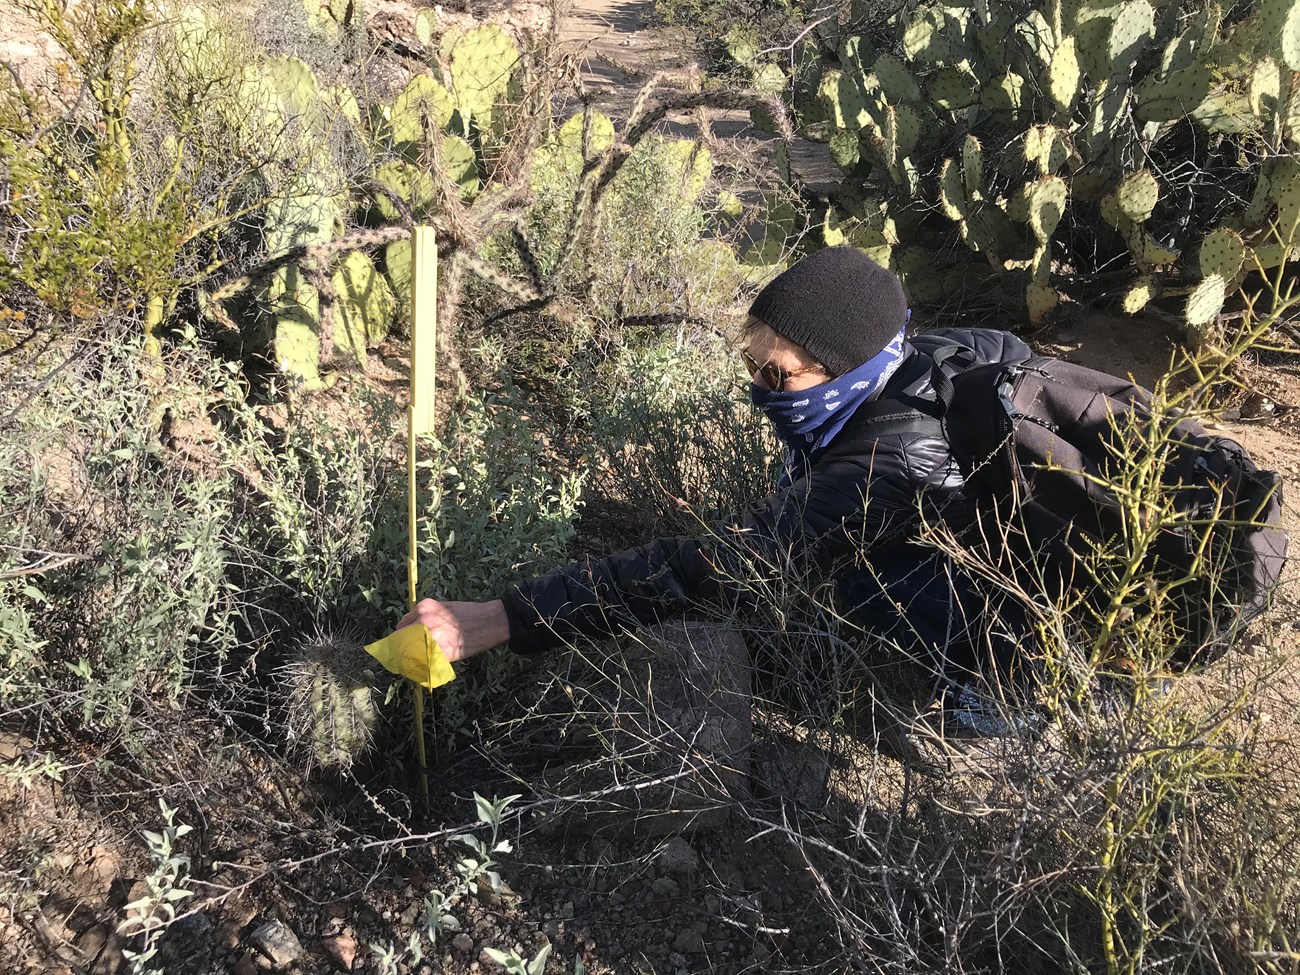 Volunteer crouches to measure small saguaro